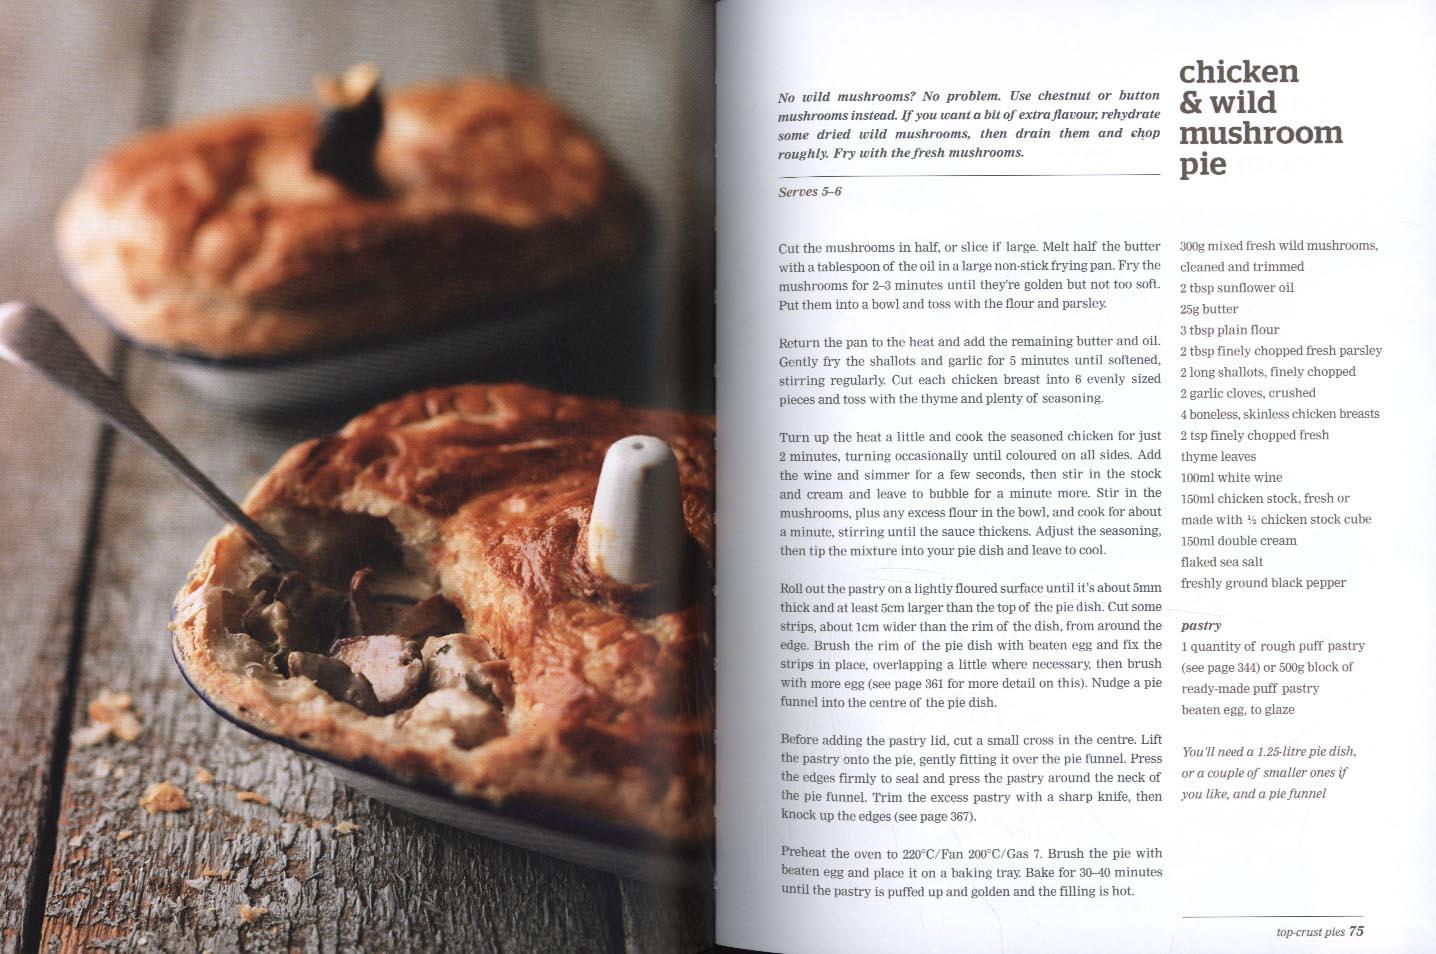 Hairy Bikers' Perfect Pies